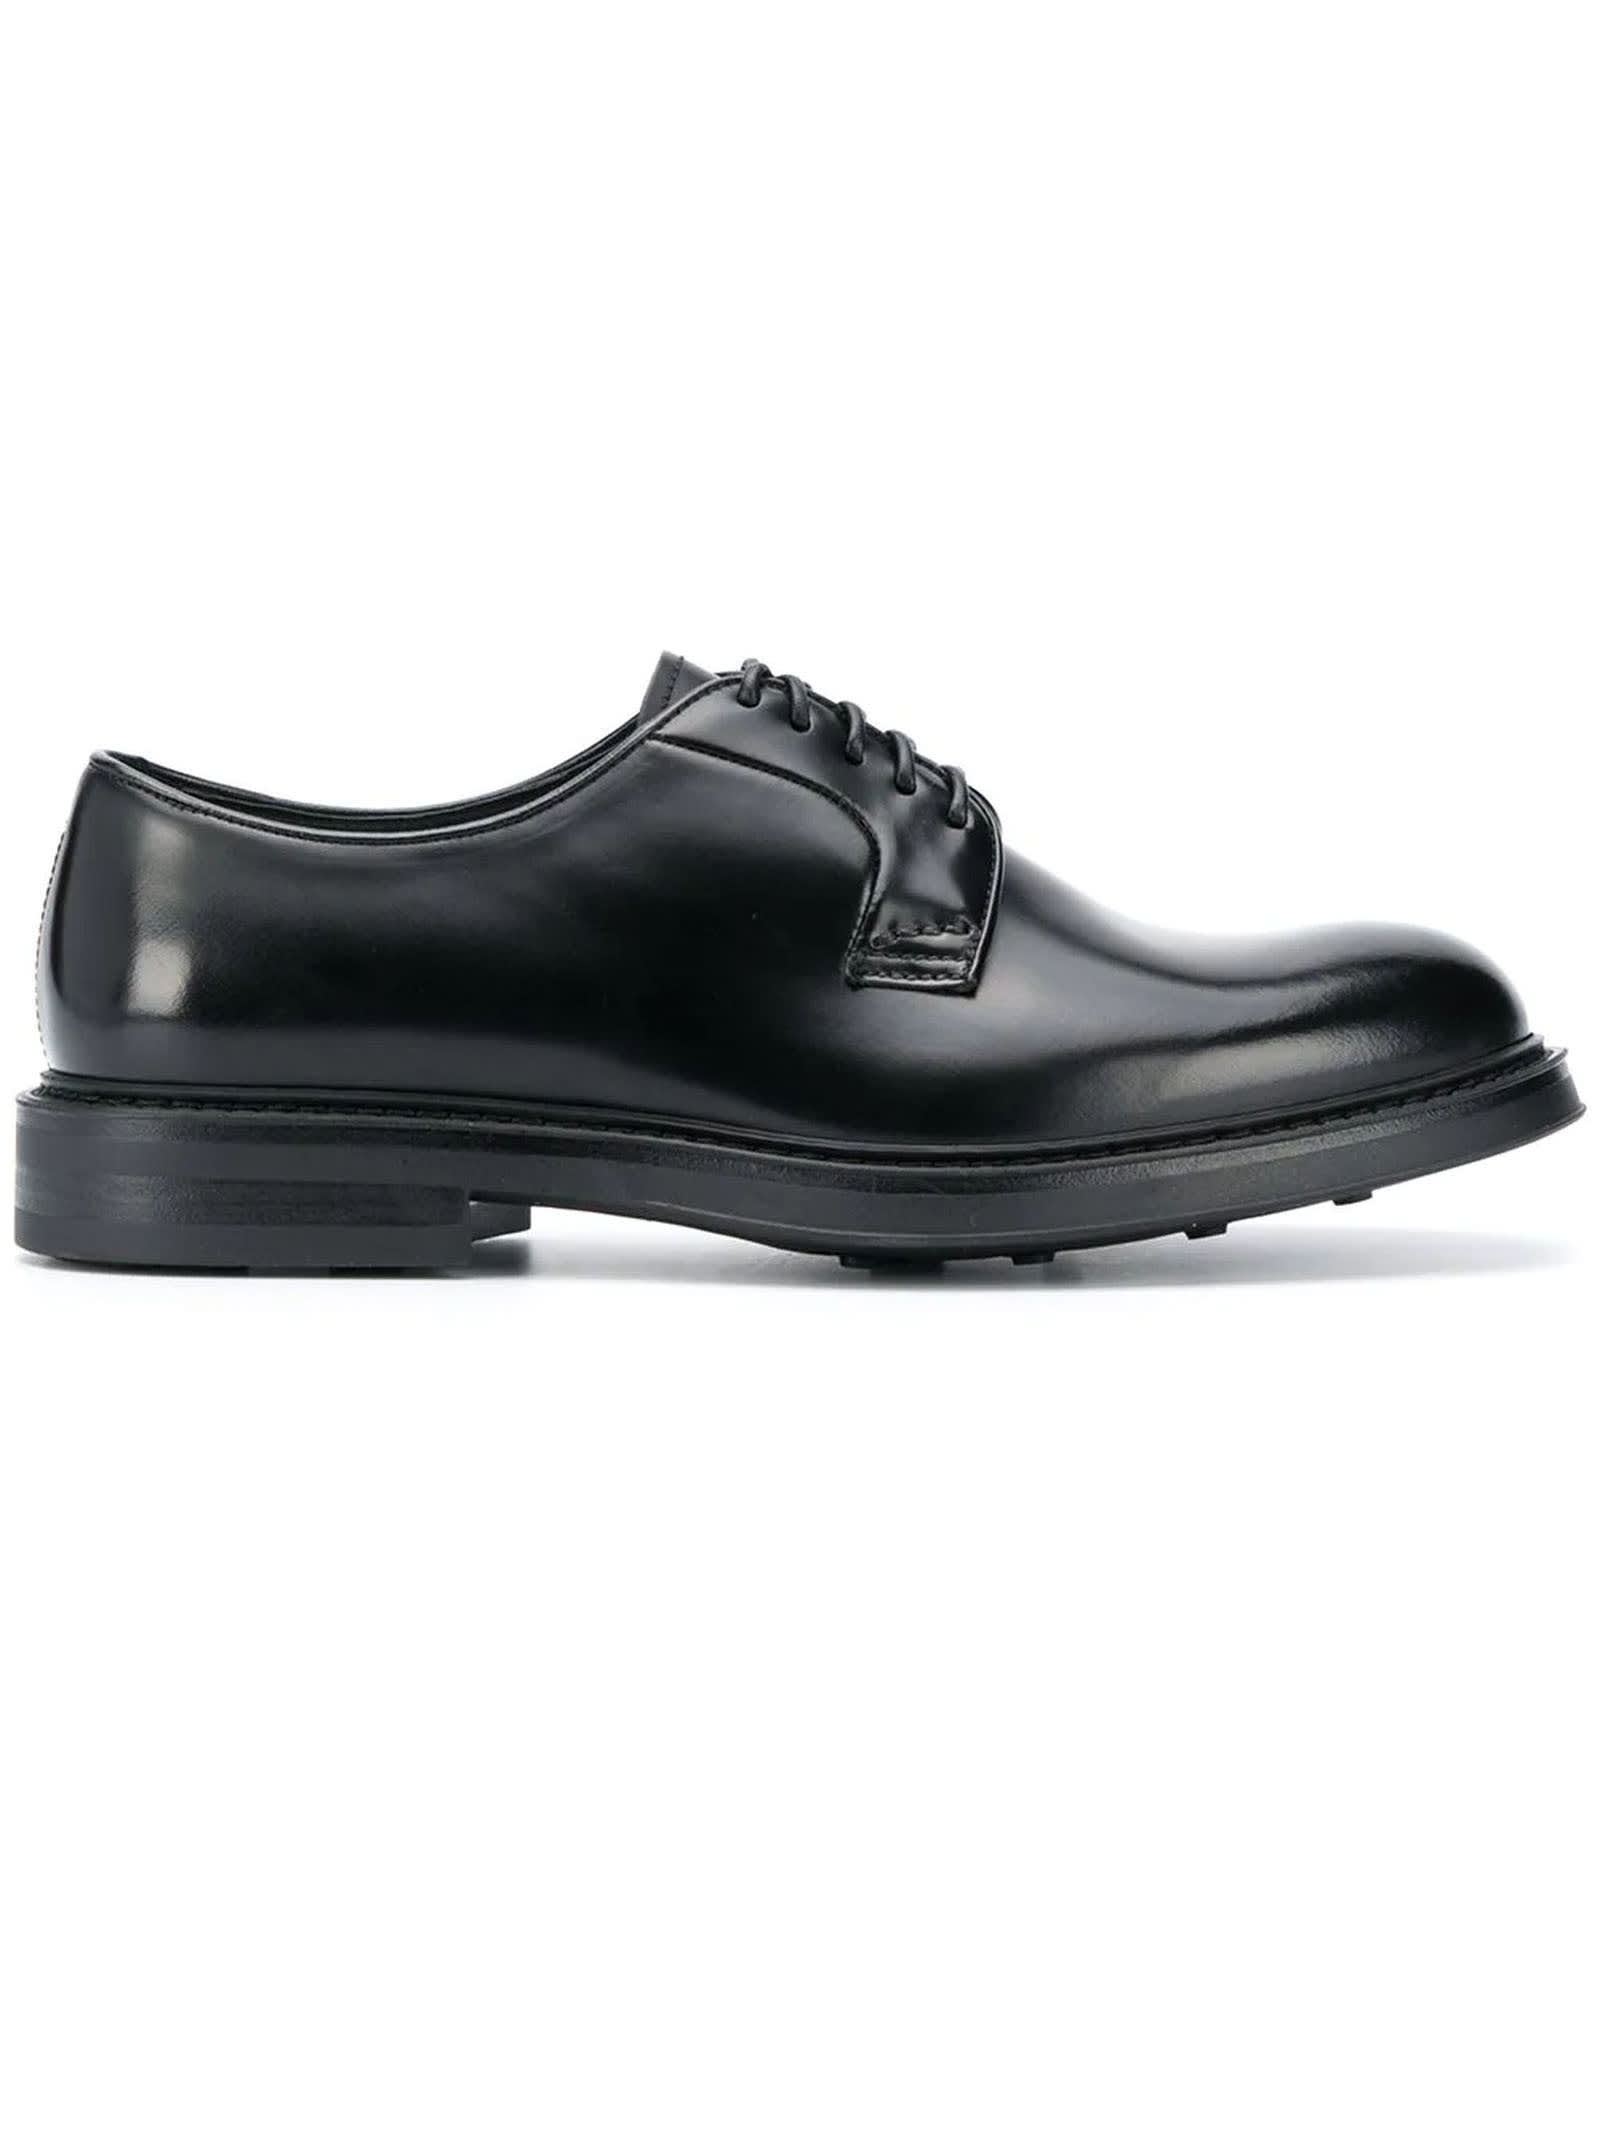 Doucal's Black Leather Lace-up Derby Shoes